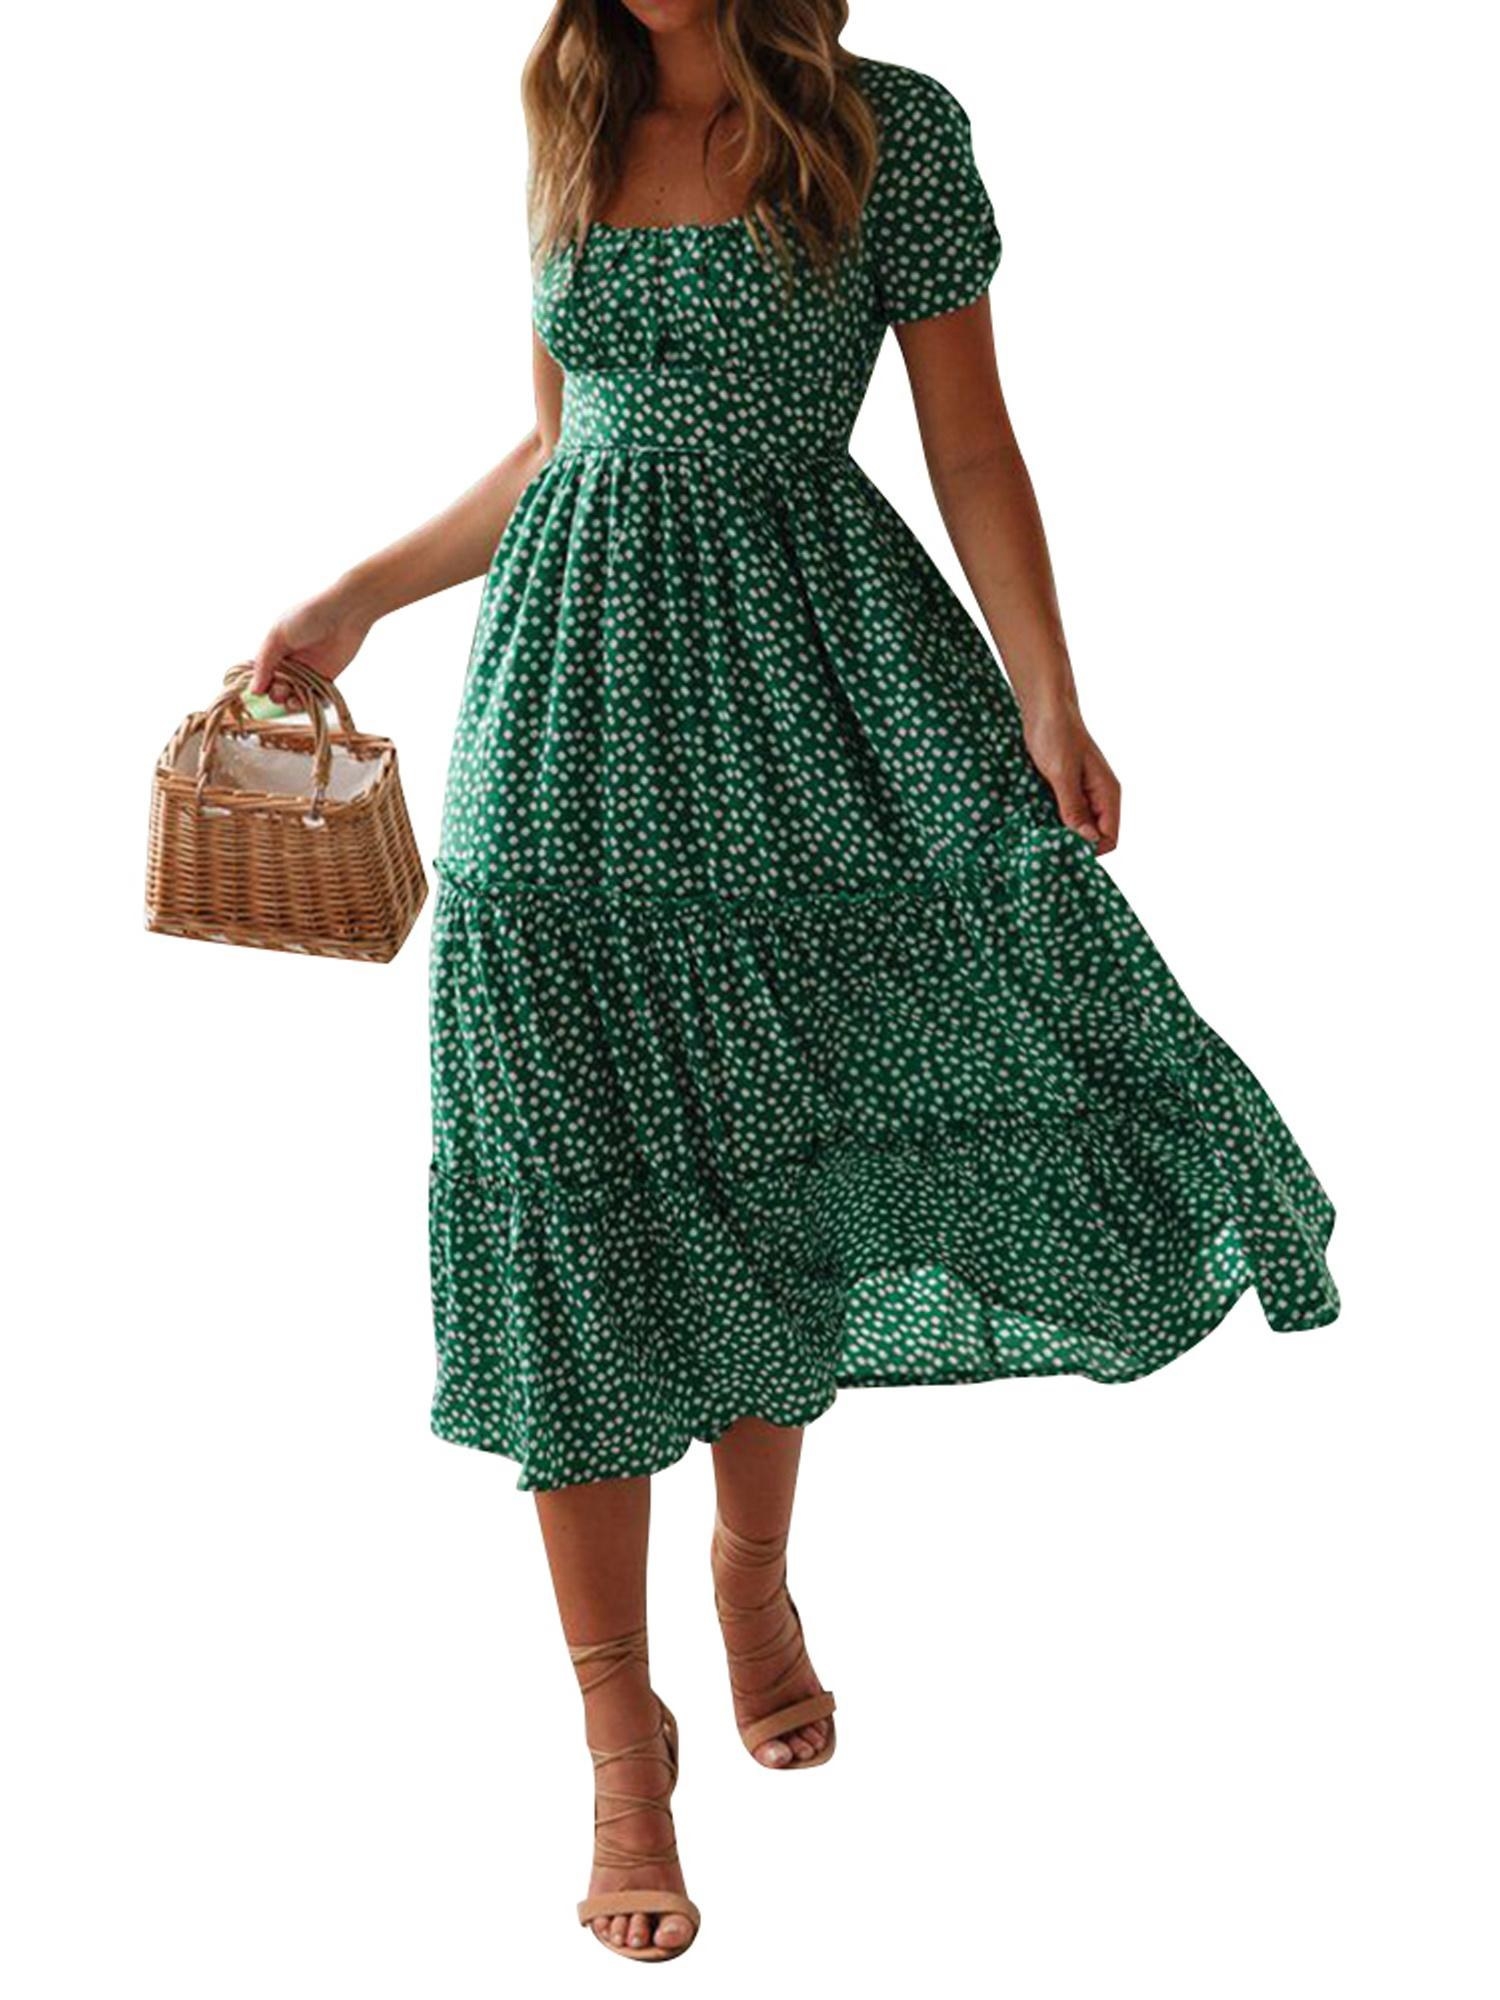 Woman in a mid-length polka dot dress holding a basket, standing in a neutral pose